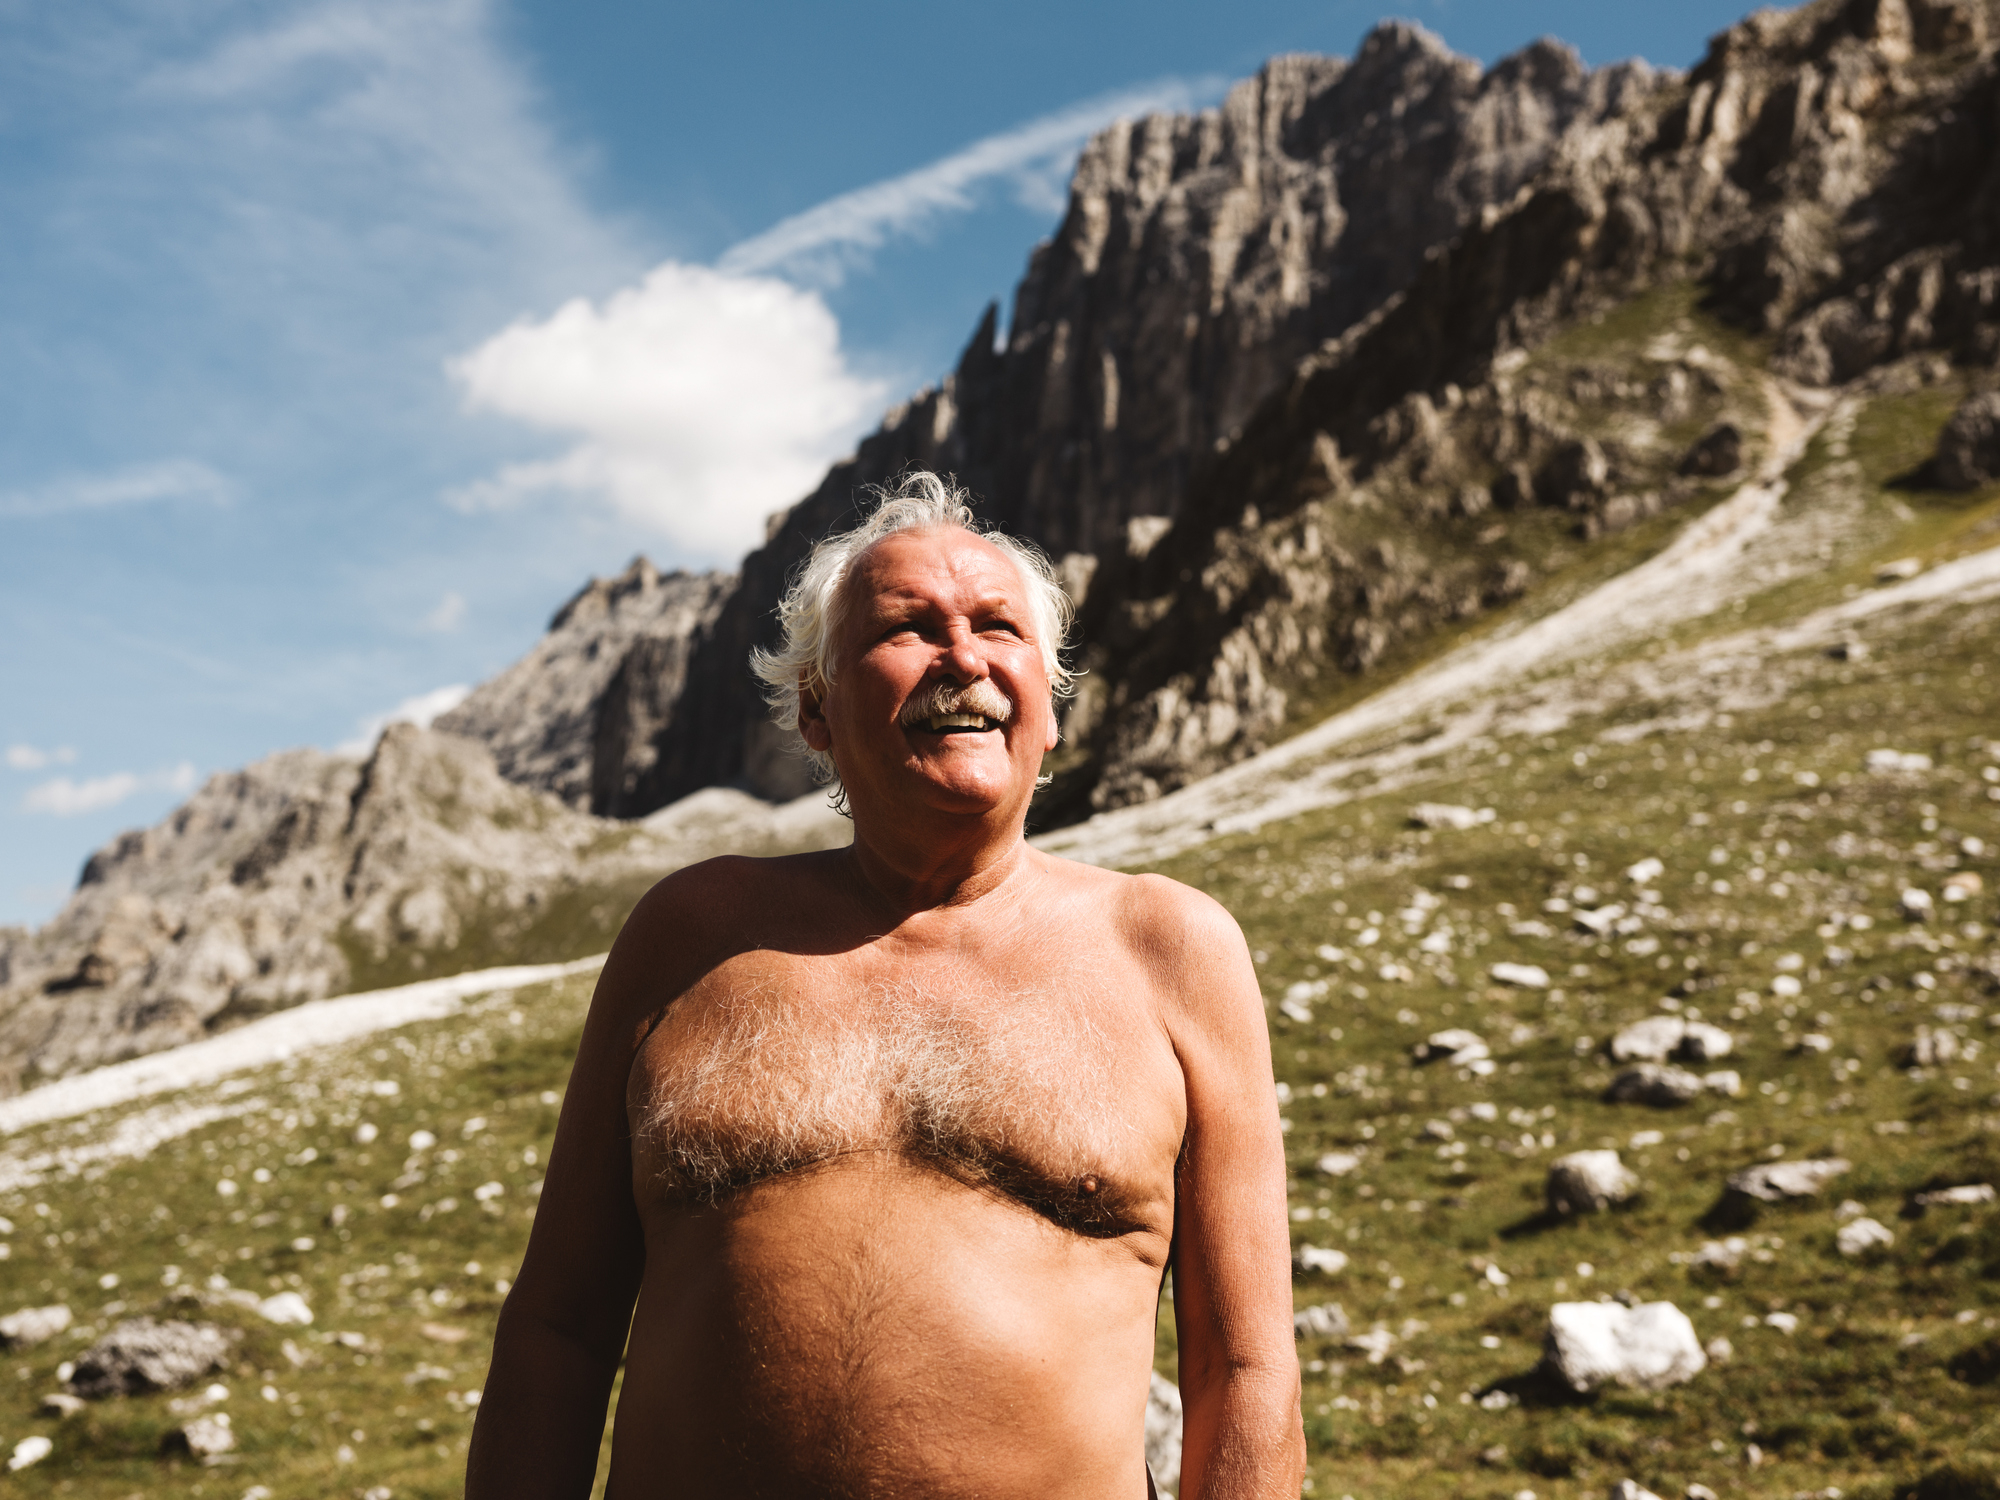 A man is standing shirtless in the mountains